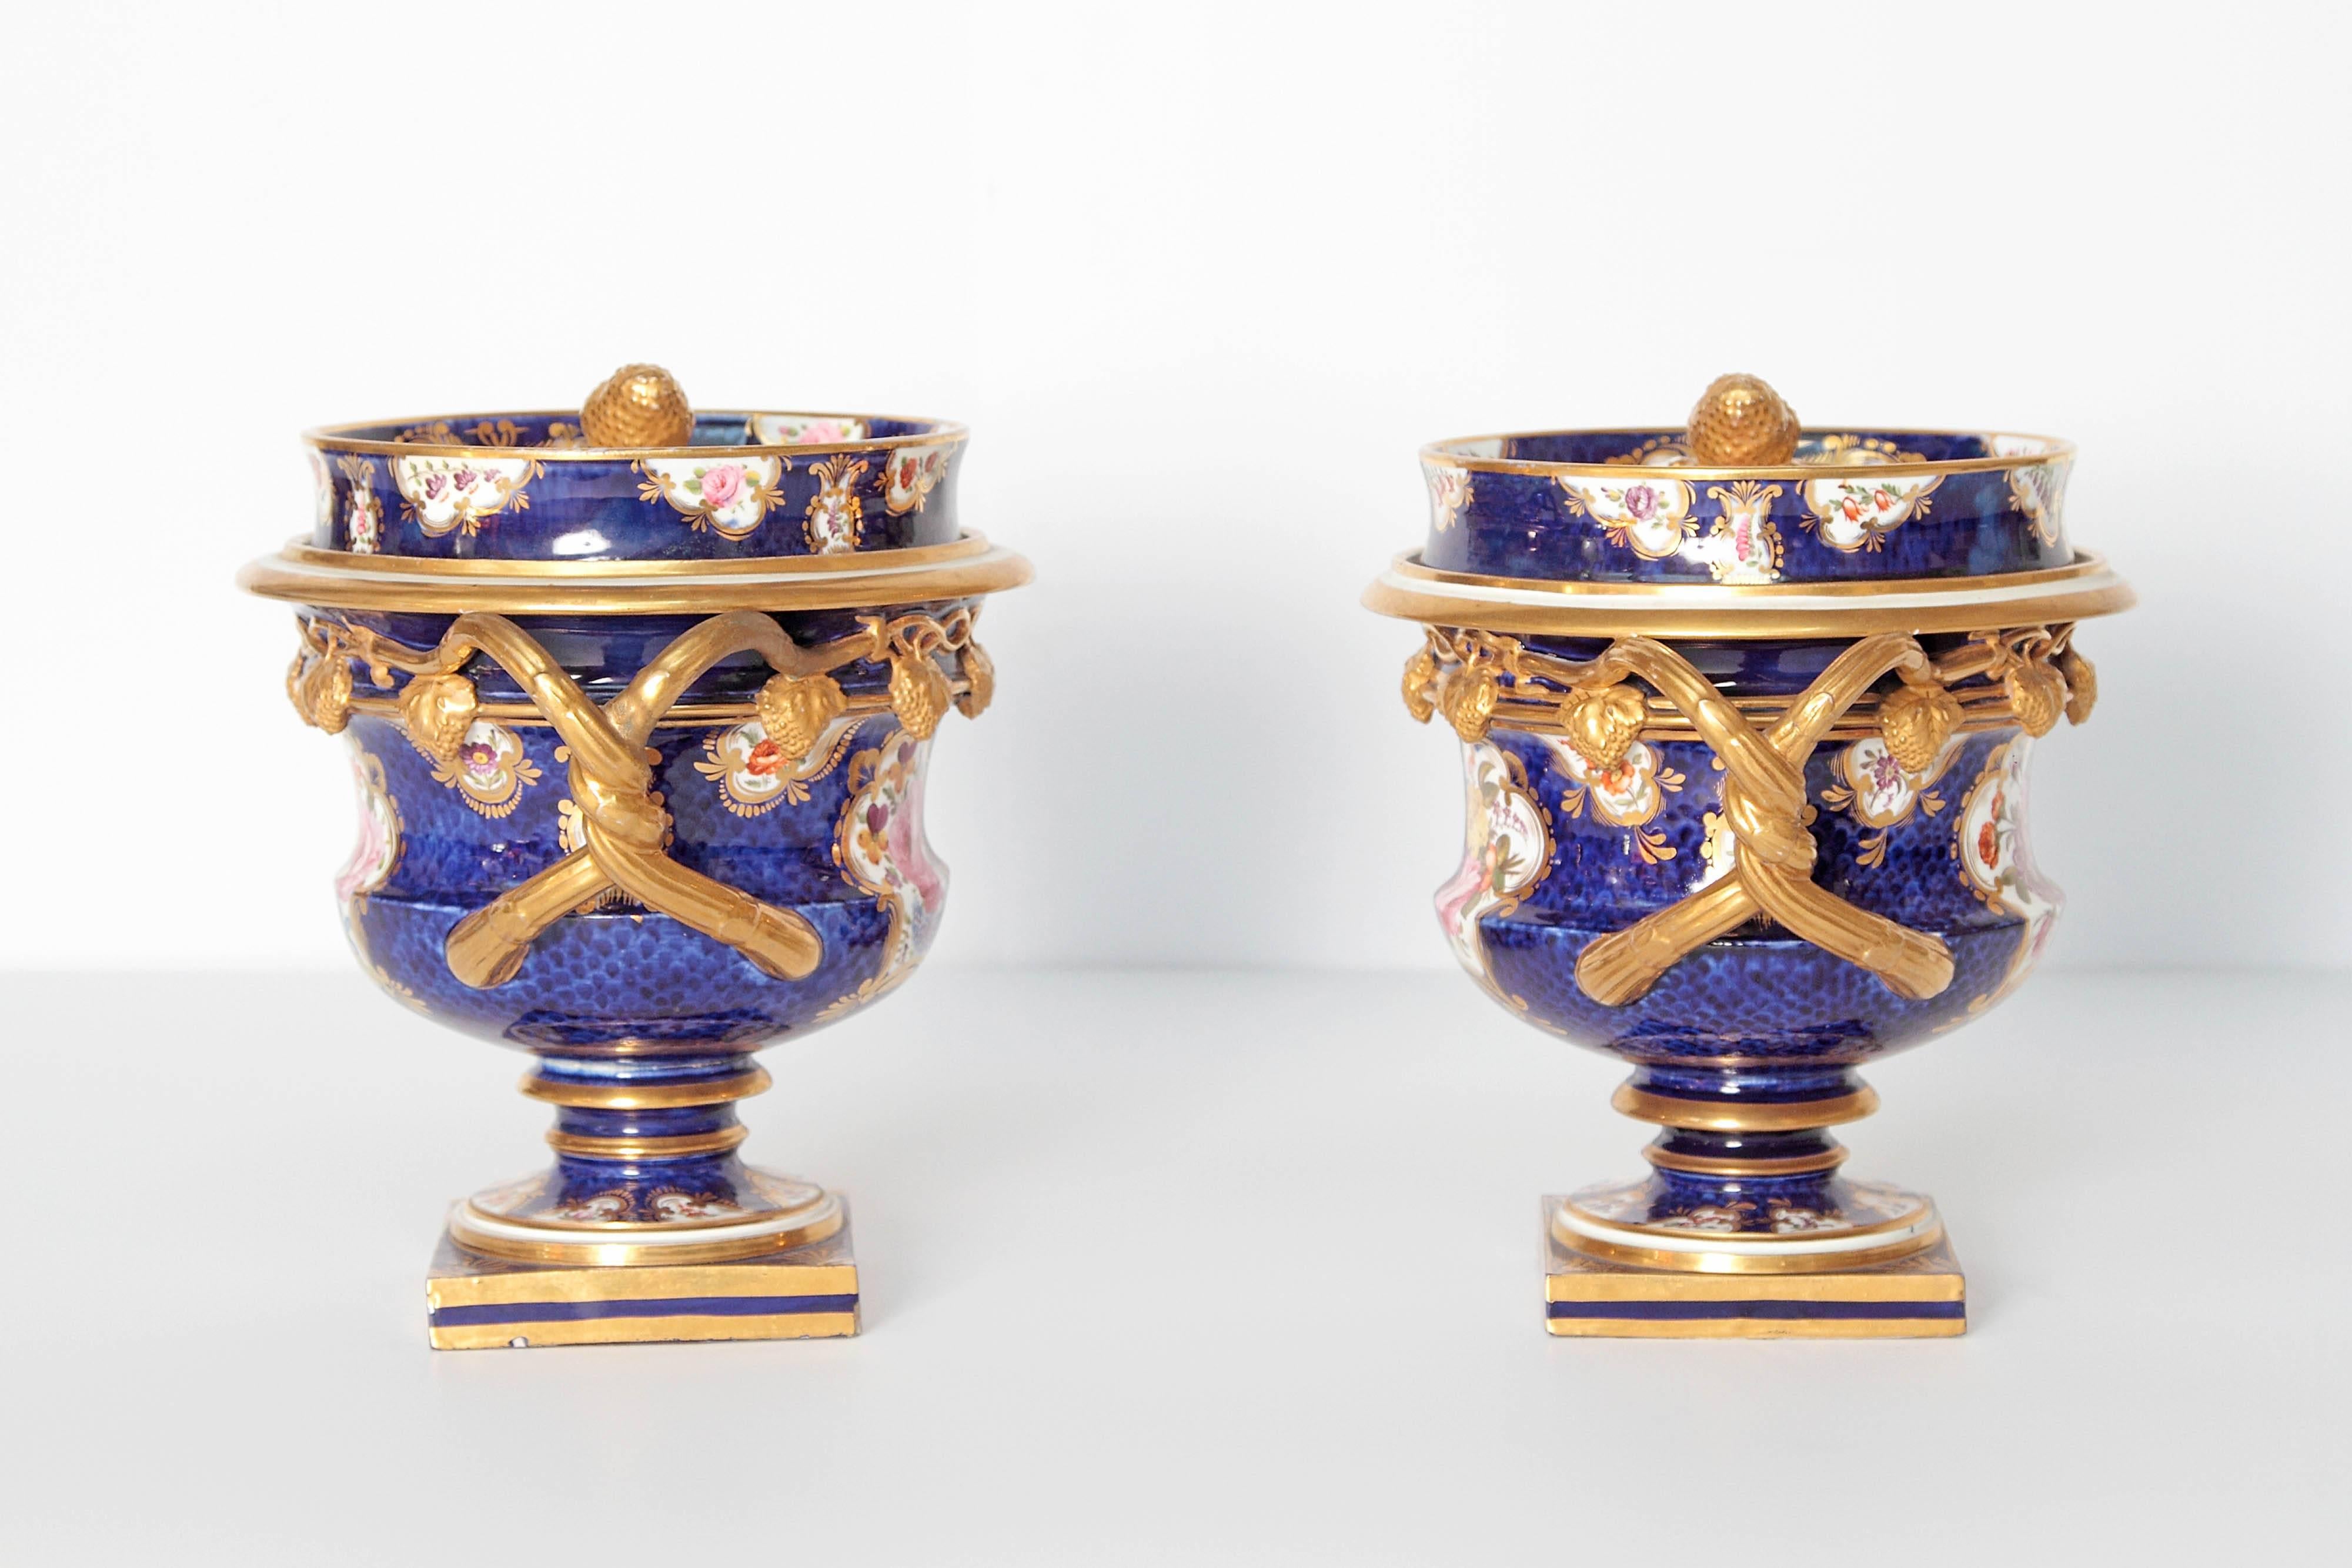 Neoclassical Pair of 19th Century English Porcelain Fruit Coolers with Covers